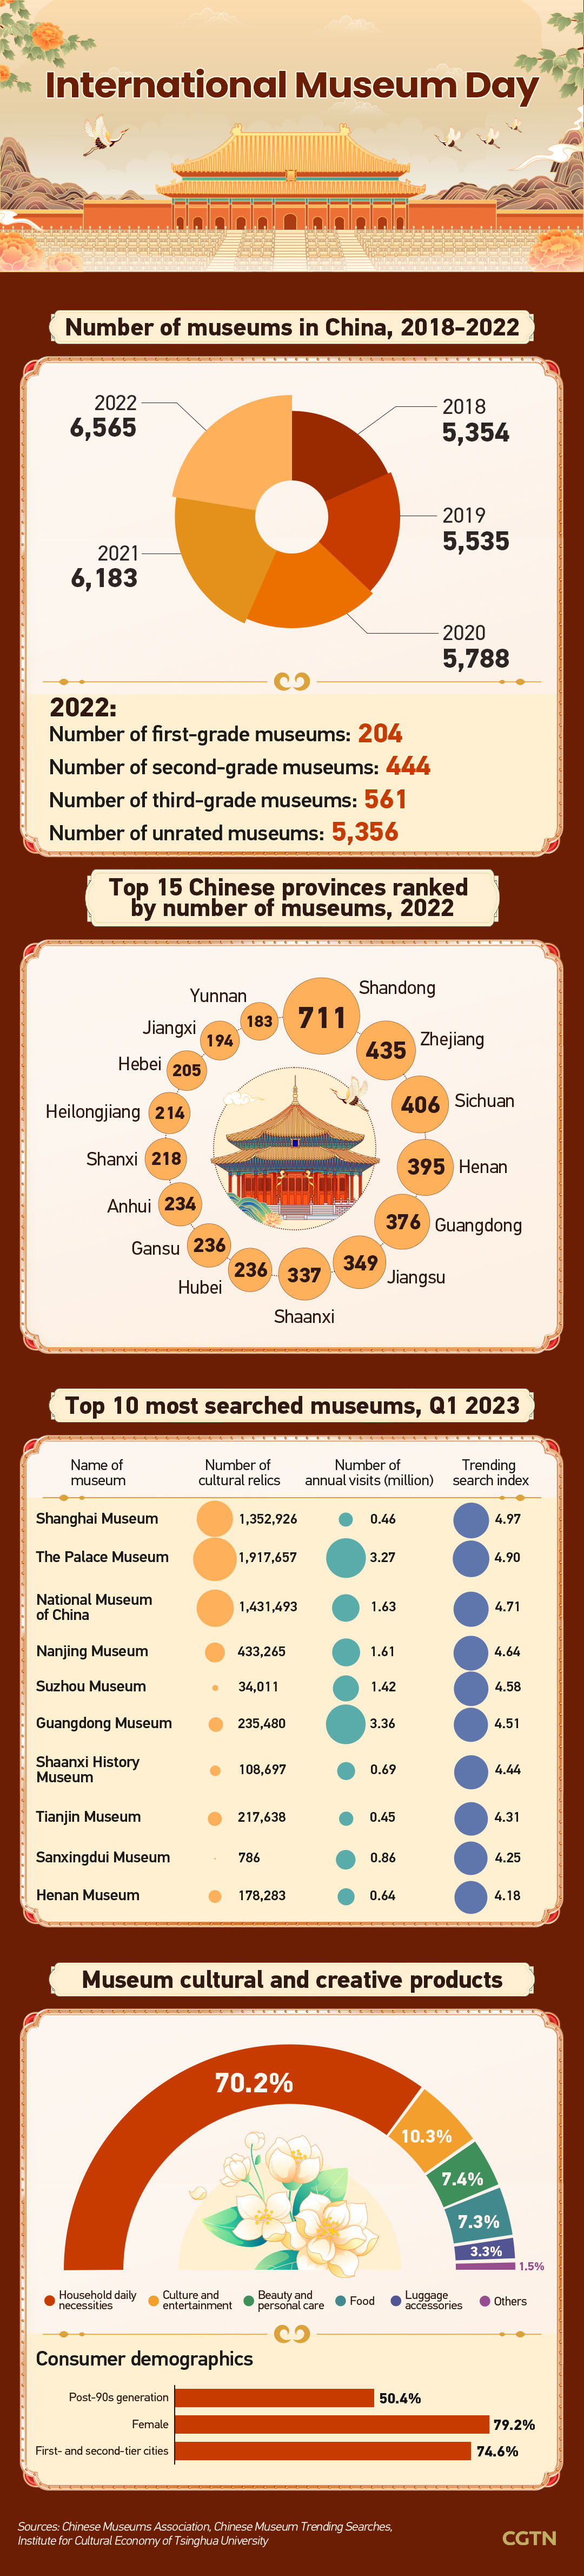 Graphics: Craze for traditional culture drives museum frenzy in China